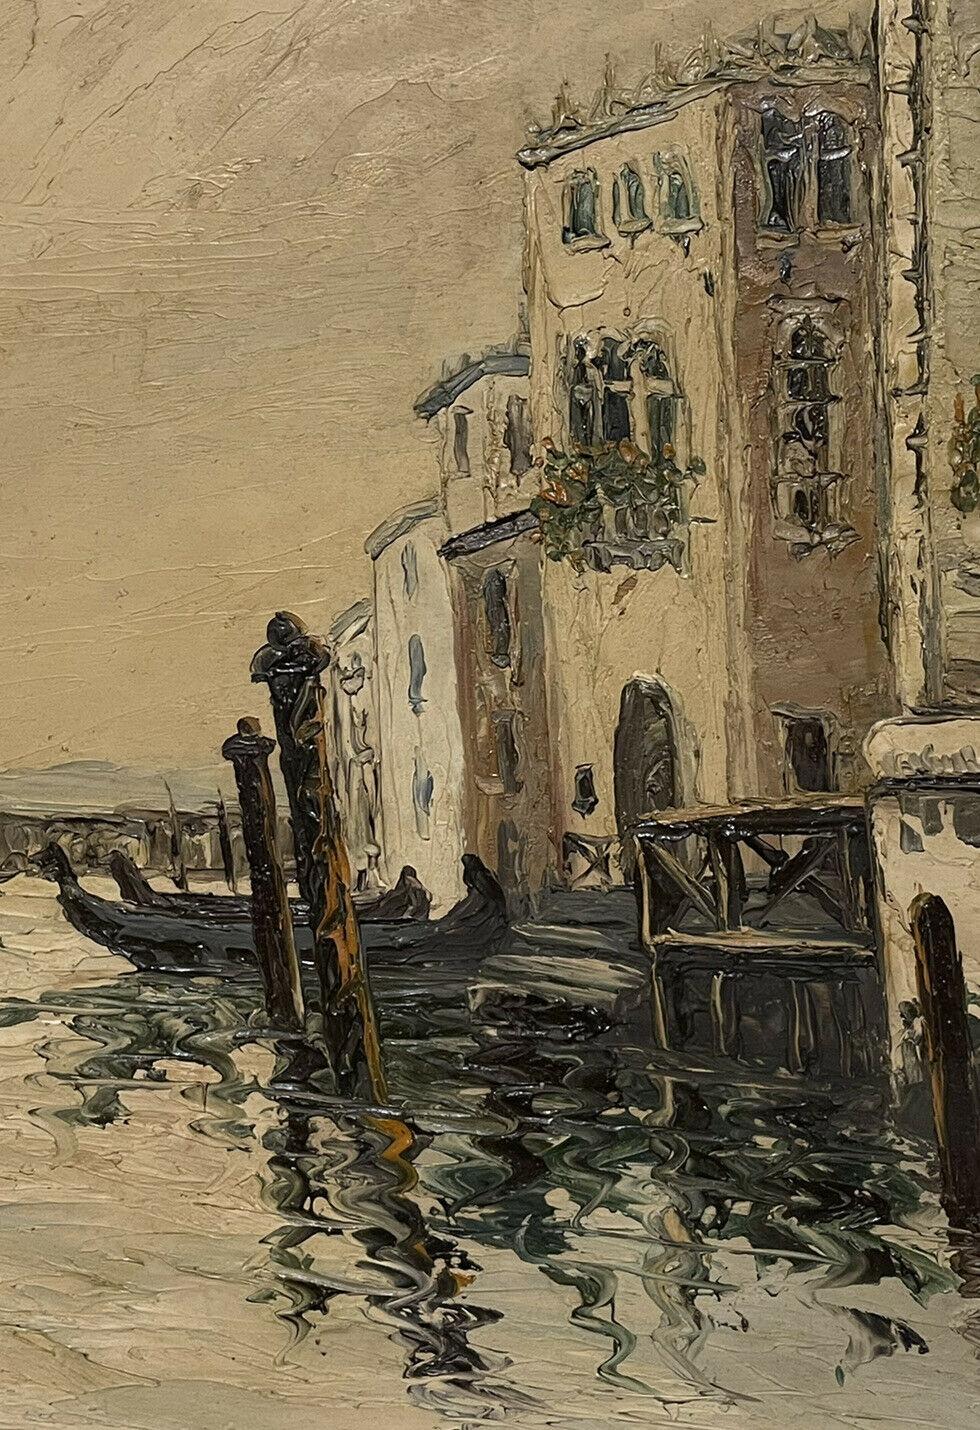 Artist/ School: Italian School, mid 20th century, signed

Title: The Grand Canal, Venice

Medium: signed oil painting on board, framed.

framed: 24.75 x 29.25 inches
canvas: 19.75 x 24 inches

Provenance: private collection, France

Condition: The